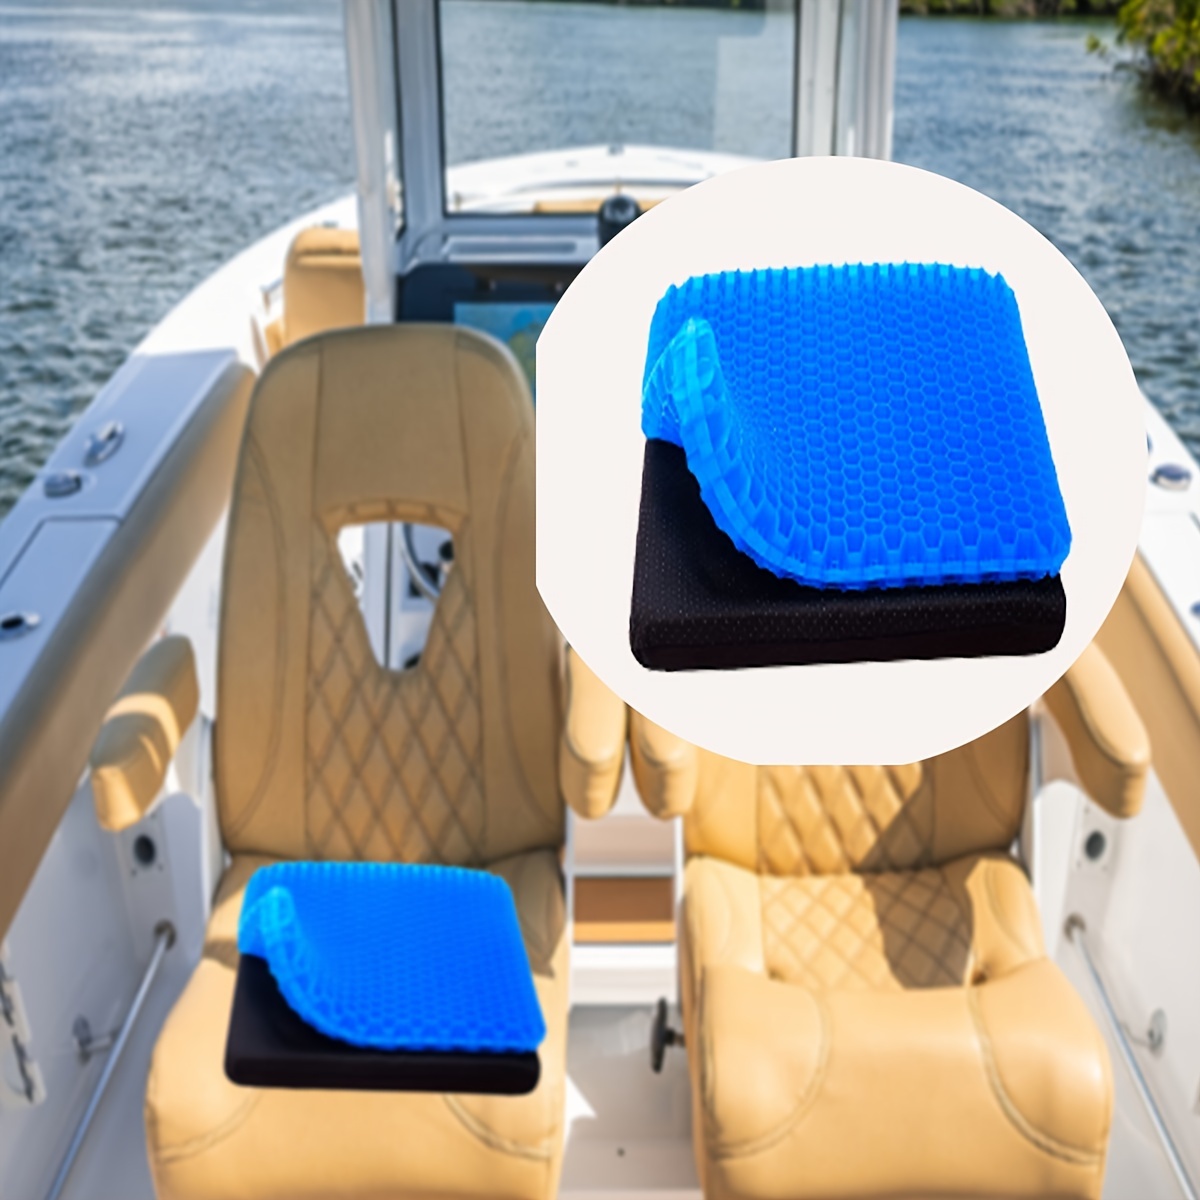 The World's Coolest Water Seat Cushion